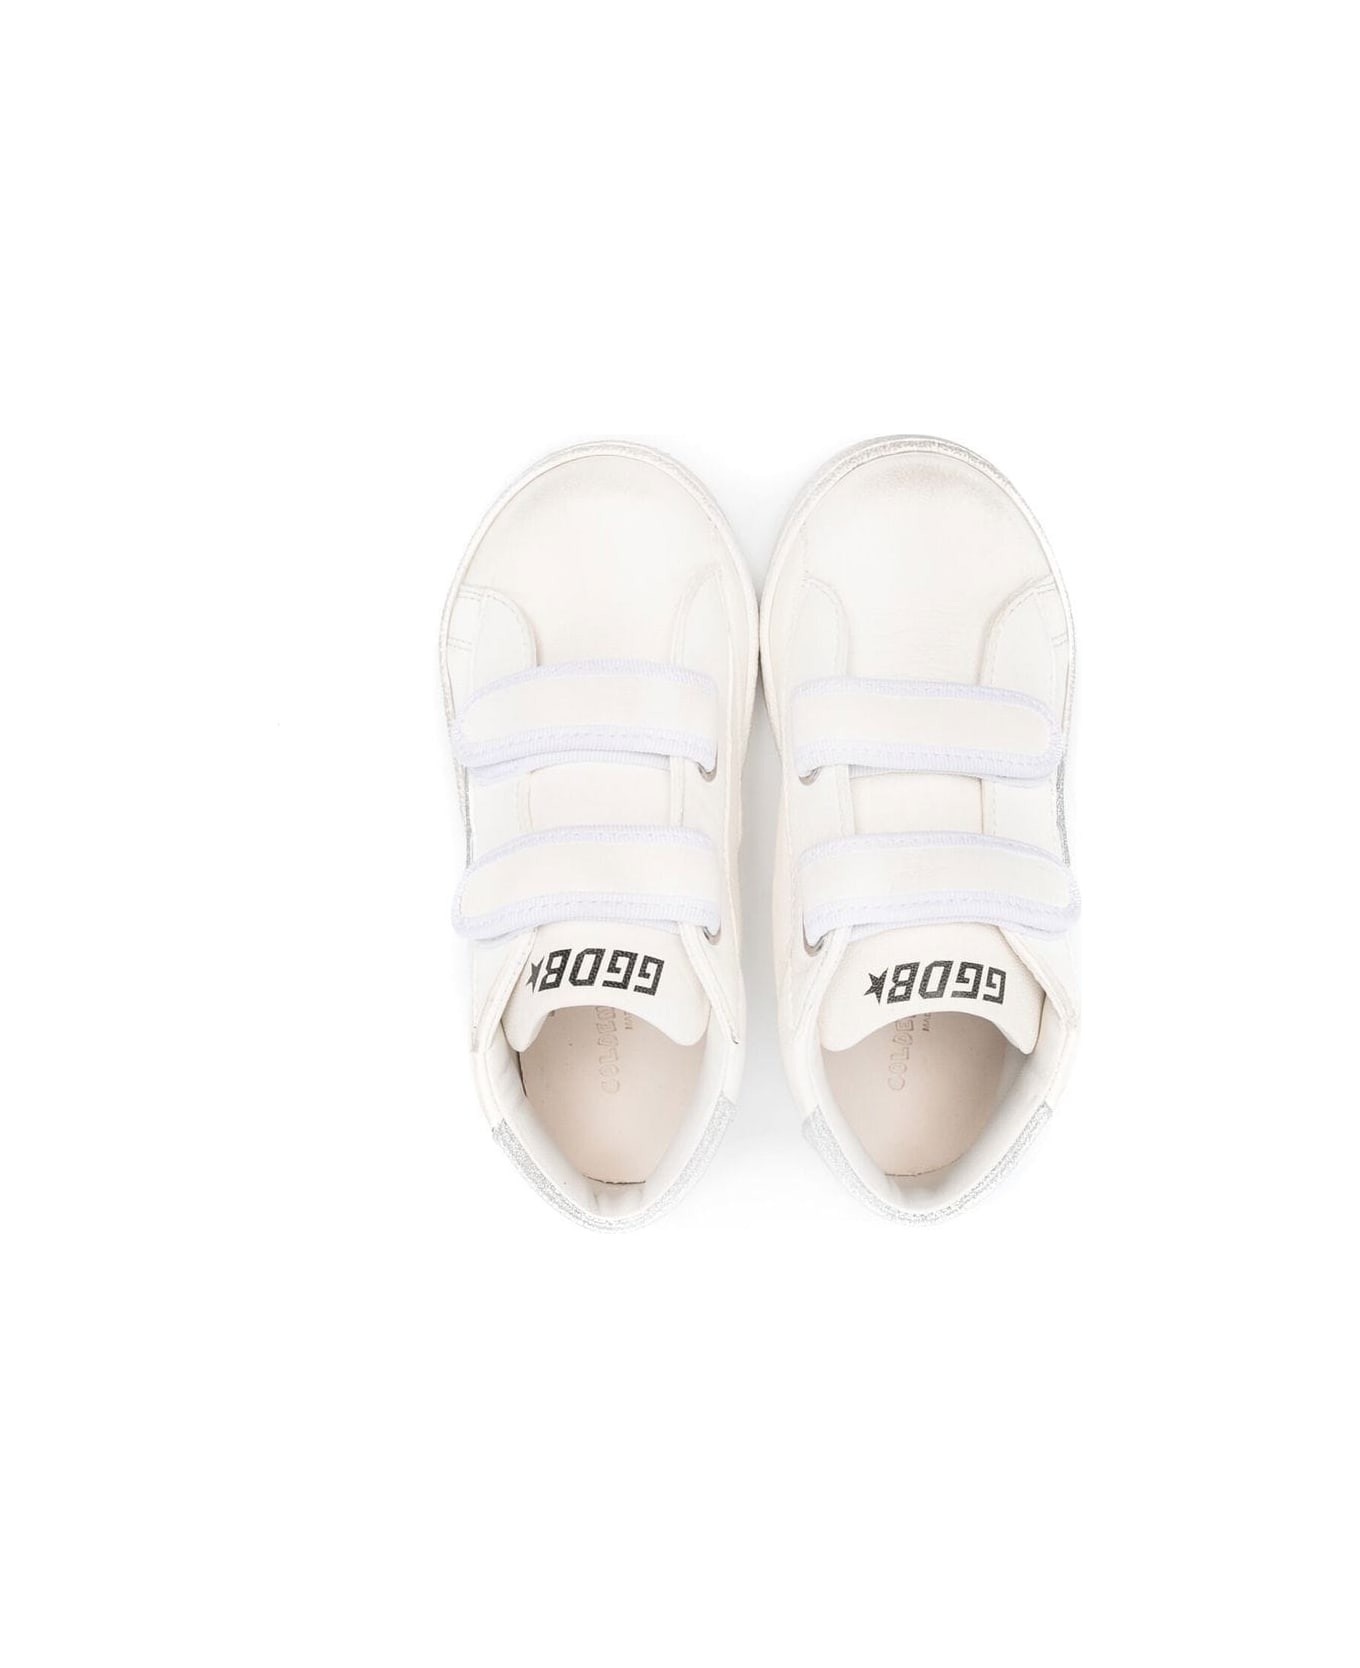 Golden Goose White Leather Sneakers - Bianco+argento